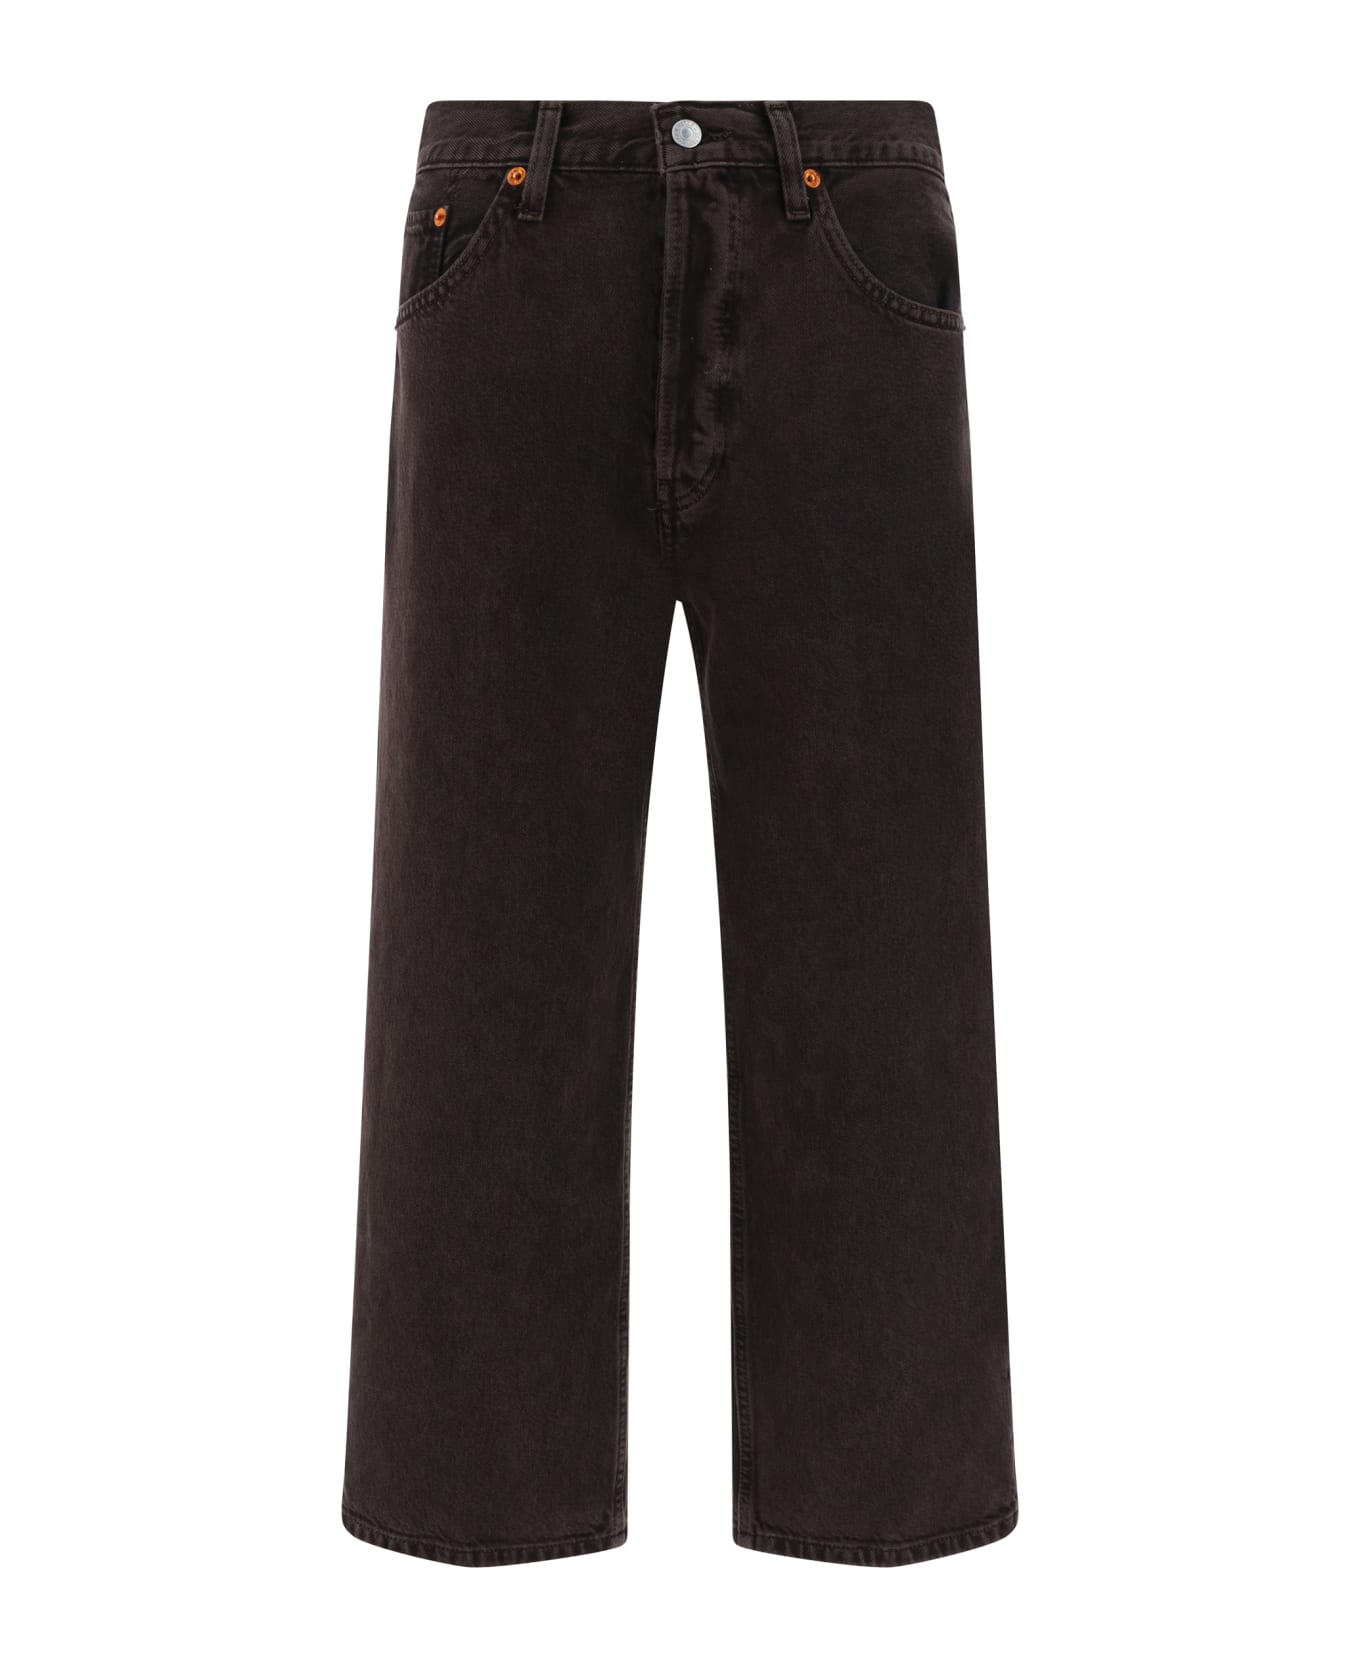 RE/DONE Loose Denim Pants - Cocoa